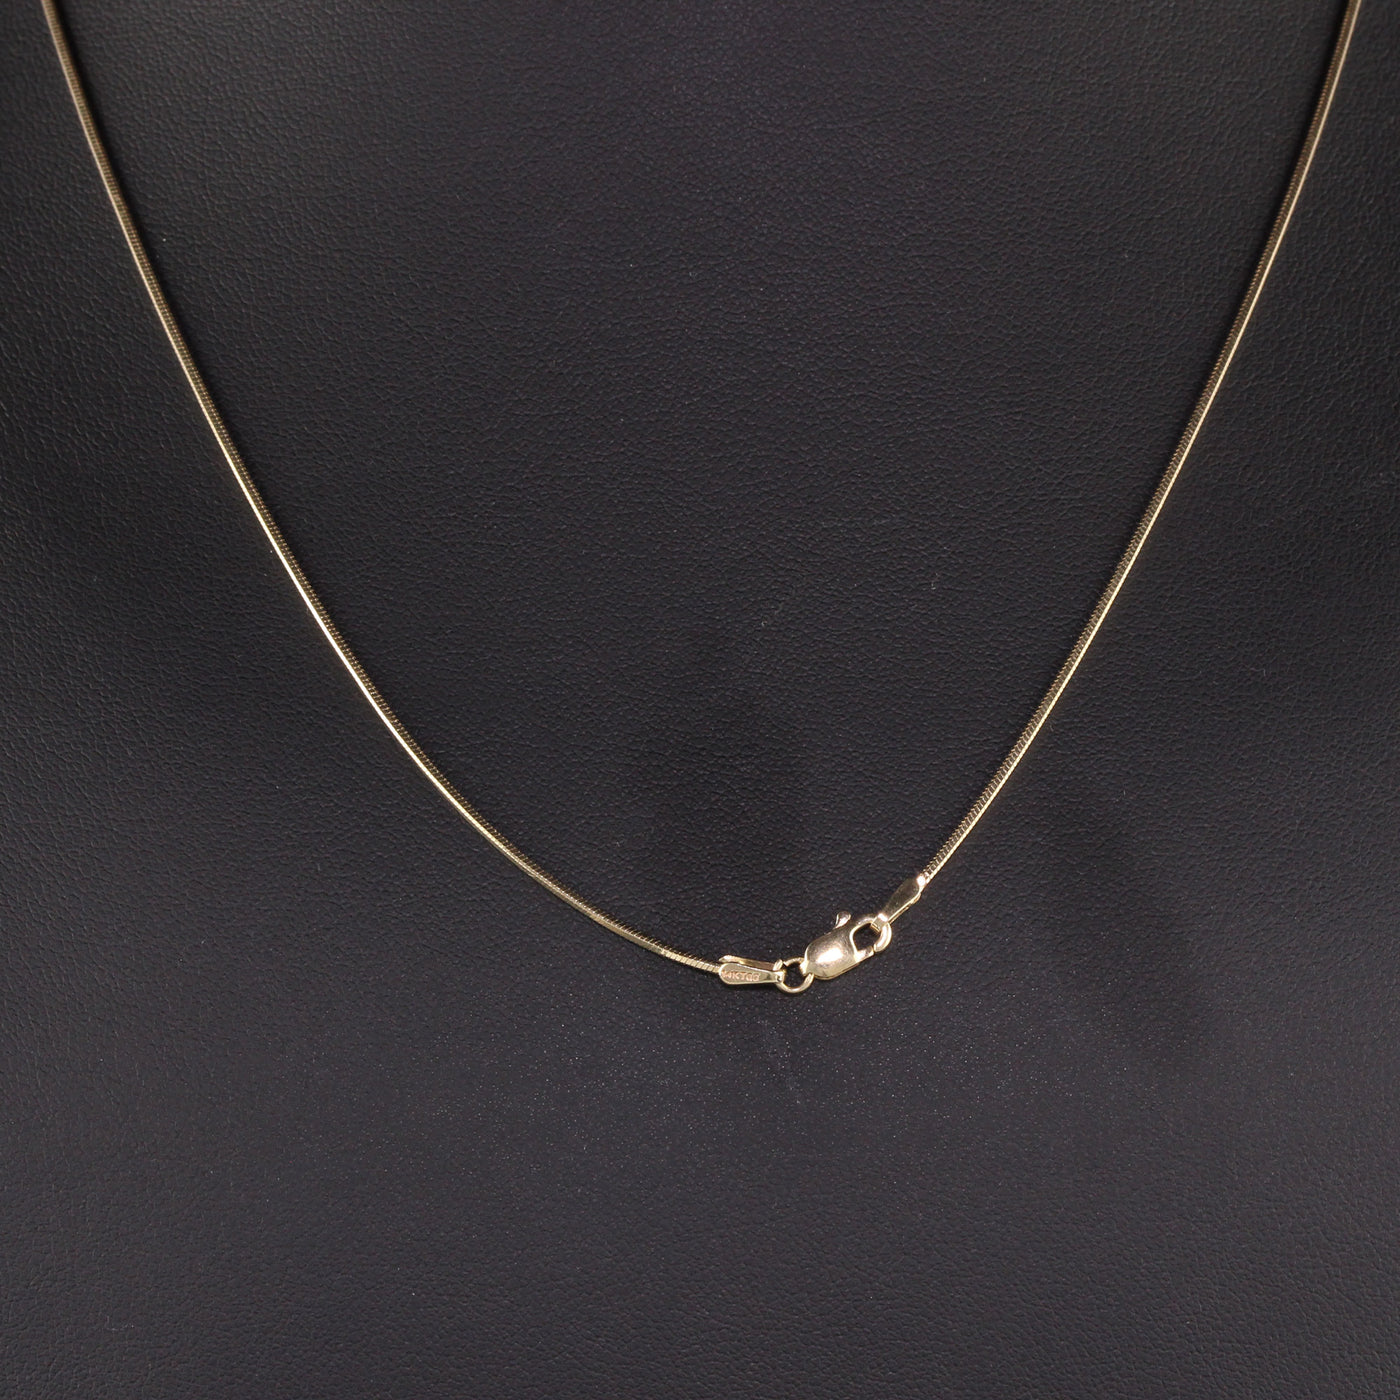 Vintage Estate 14K Yellow Gold Box Chain - 18 Inches